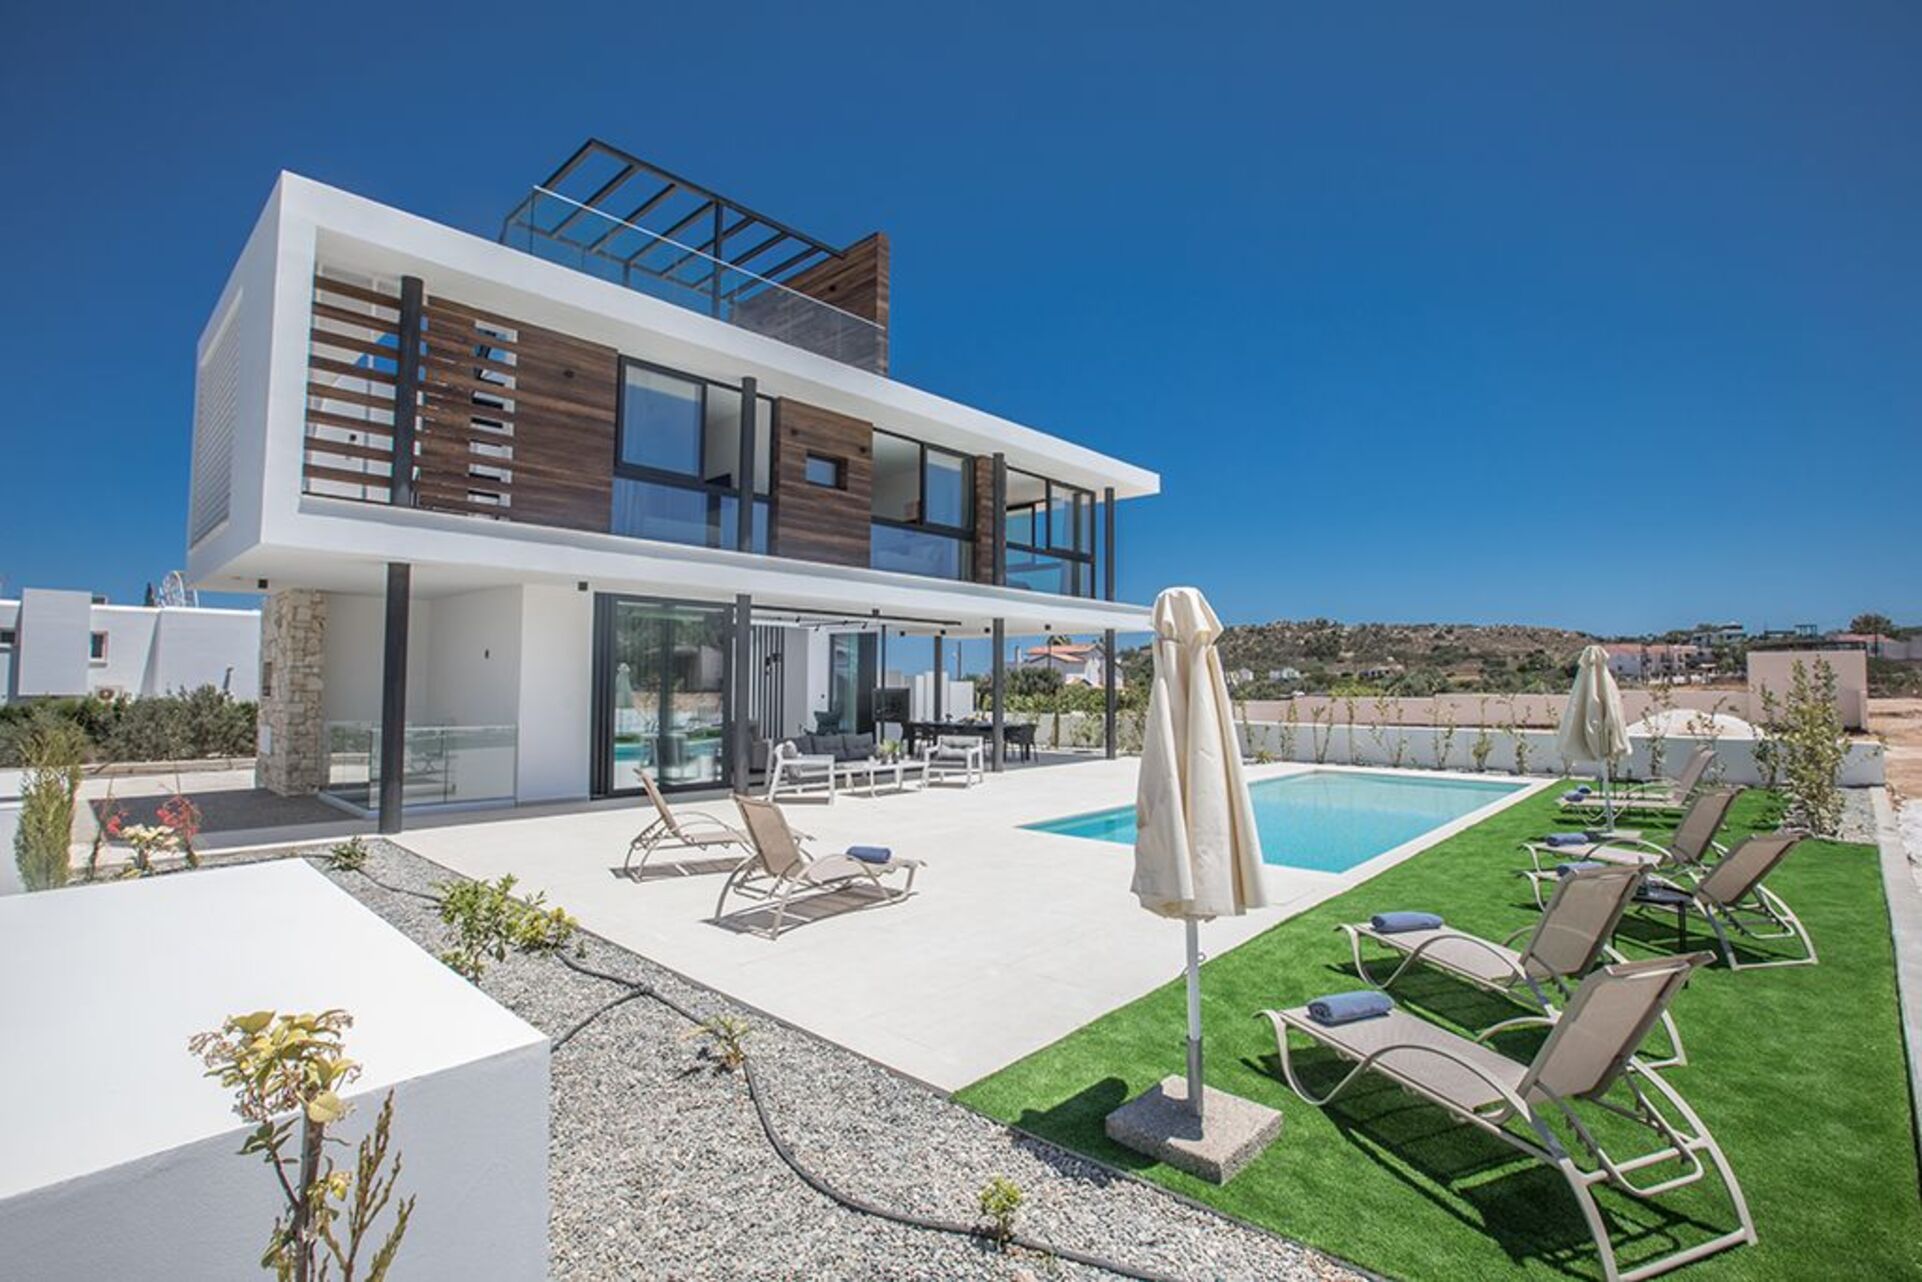 Property Image 2 - Rent Your Dream Protaras Holiday Villa and Look Forward to Relaxing Beside Your Private Pool, Protaras Vil